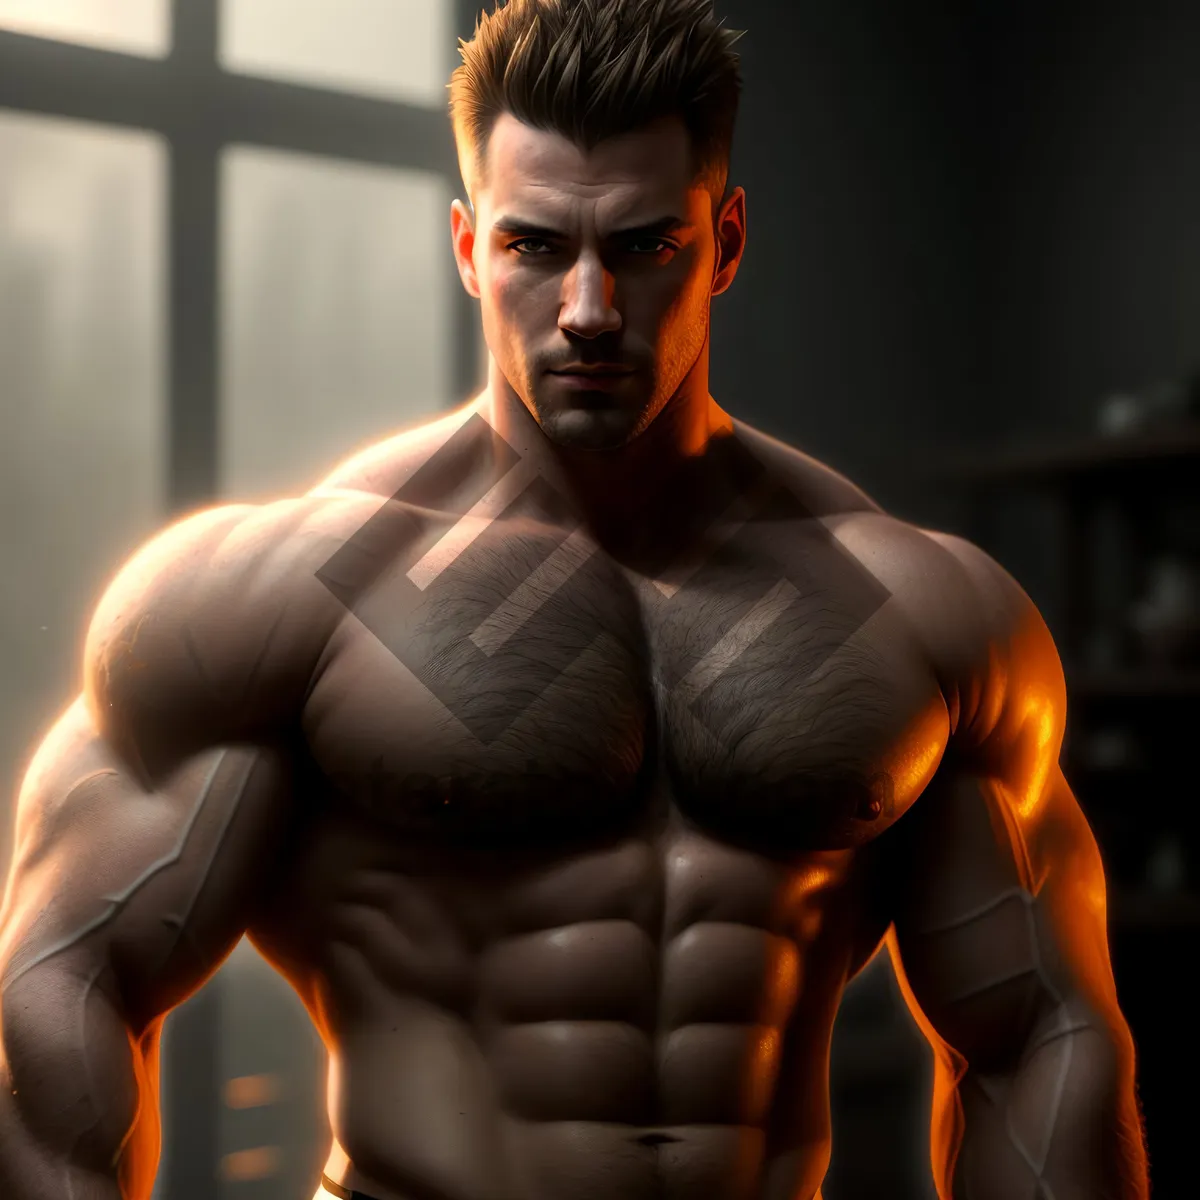 Picture of Muscular Athlete's Powerful and Sexy Torso